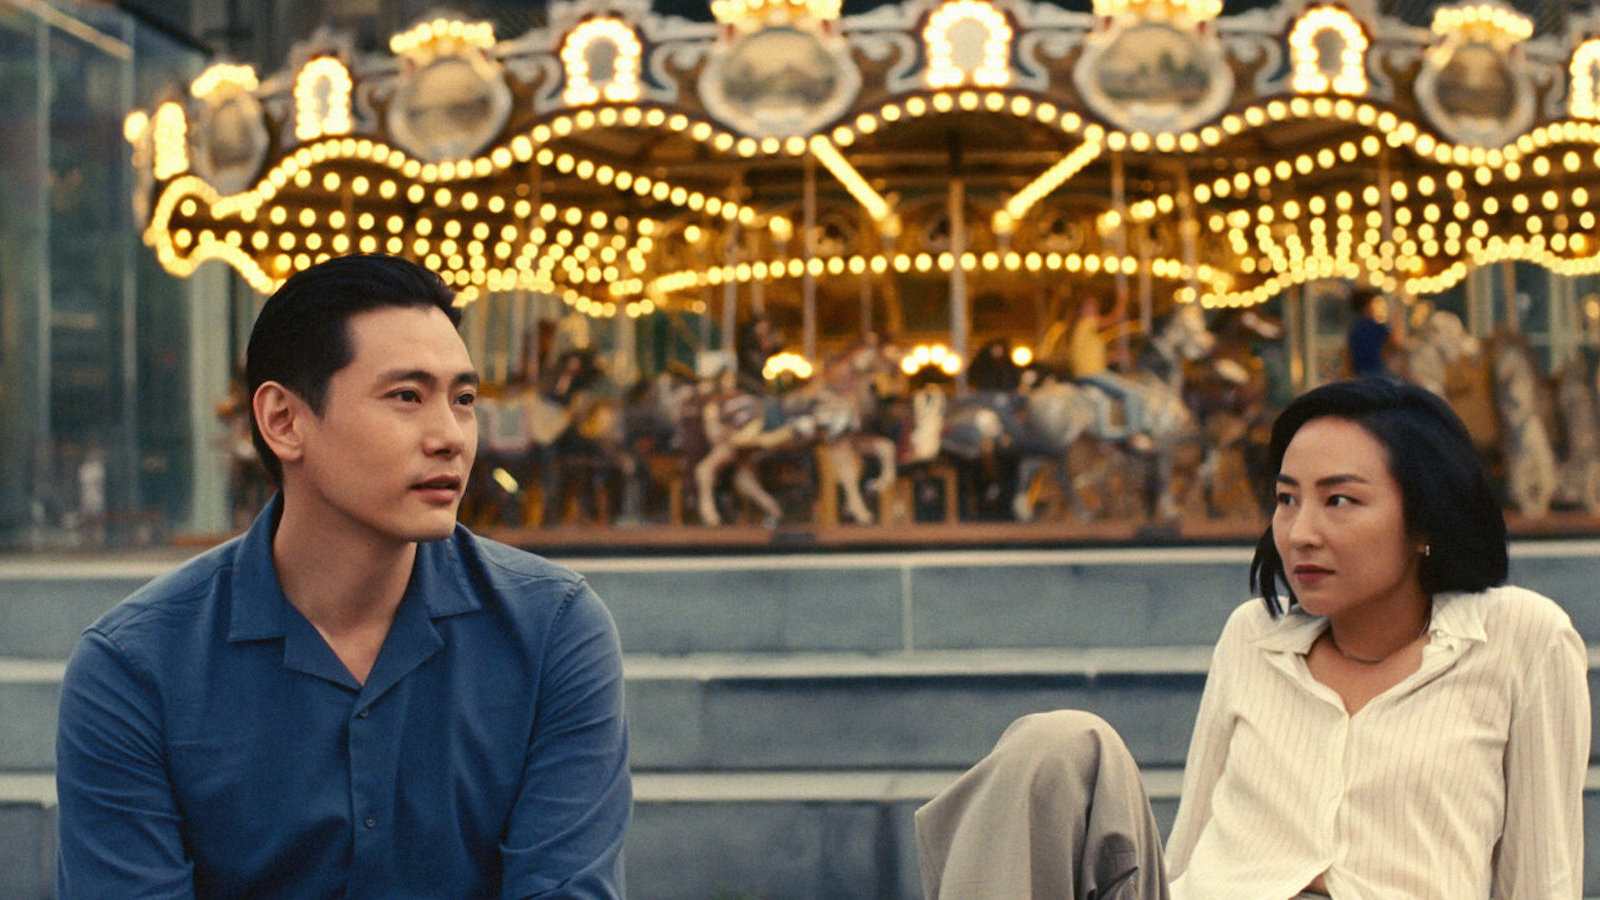 A man and woman sit on either side of the photograph, facing the camera and sitting in front of a lit-up merry-go-round.